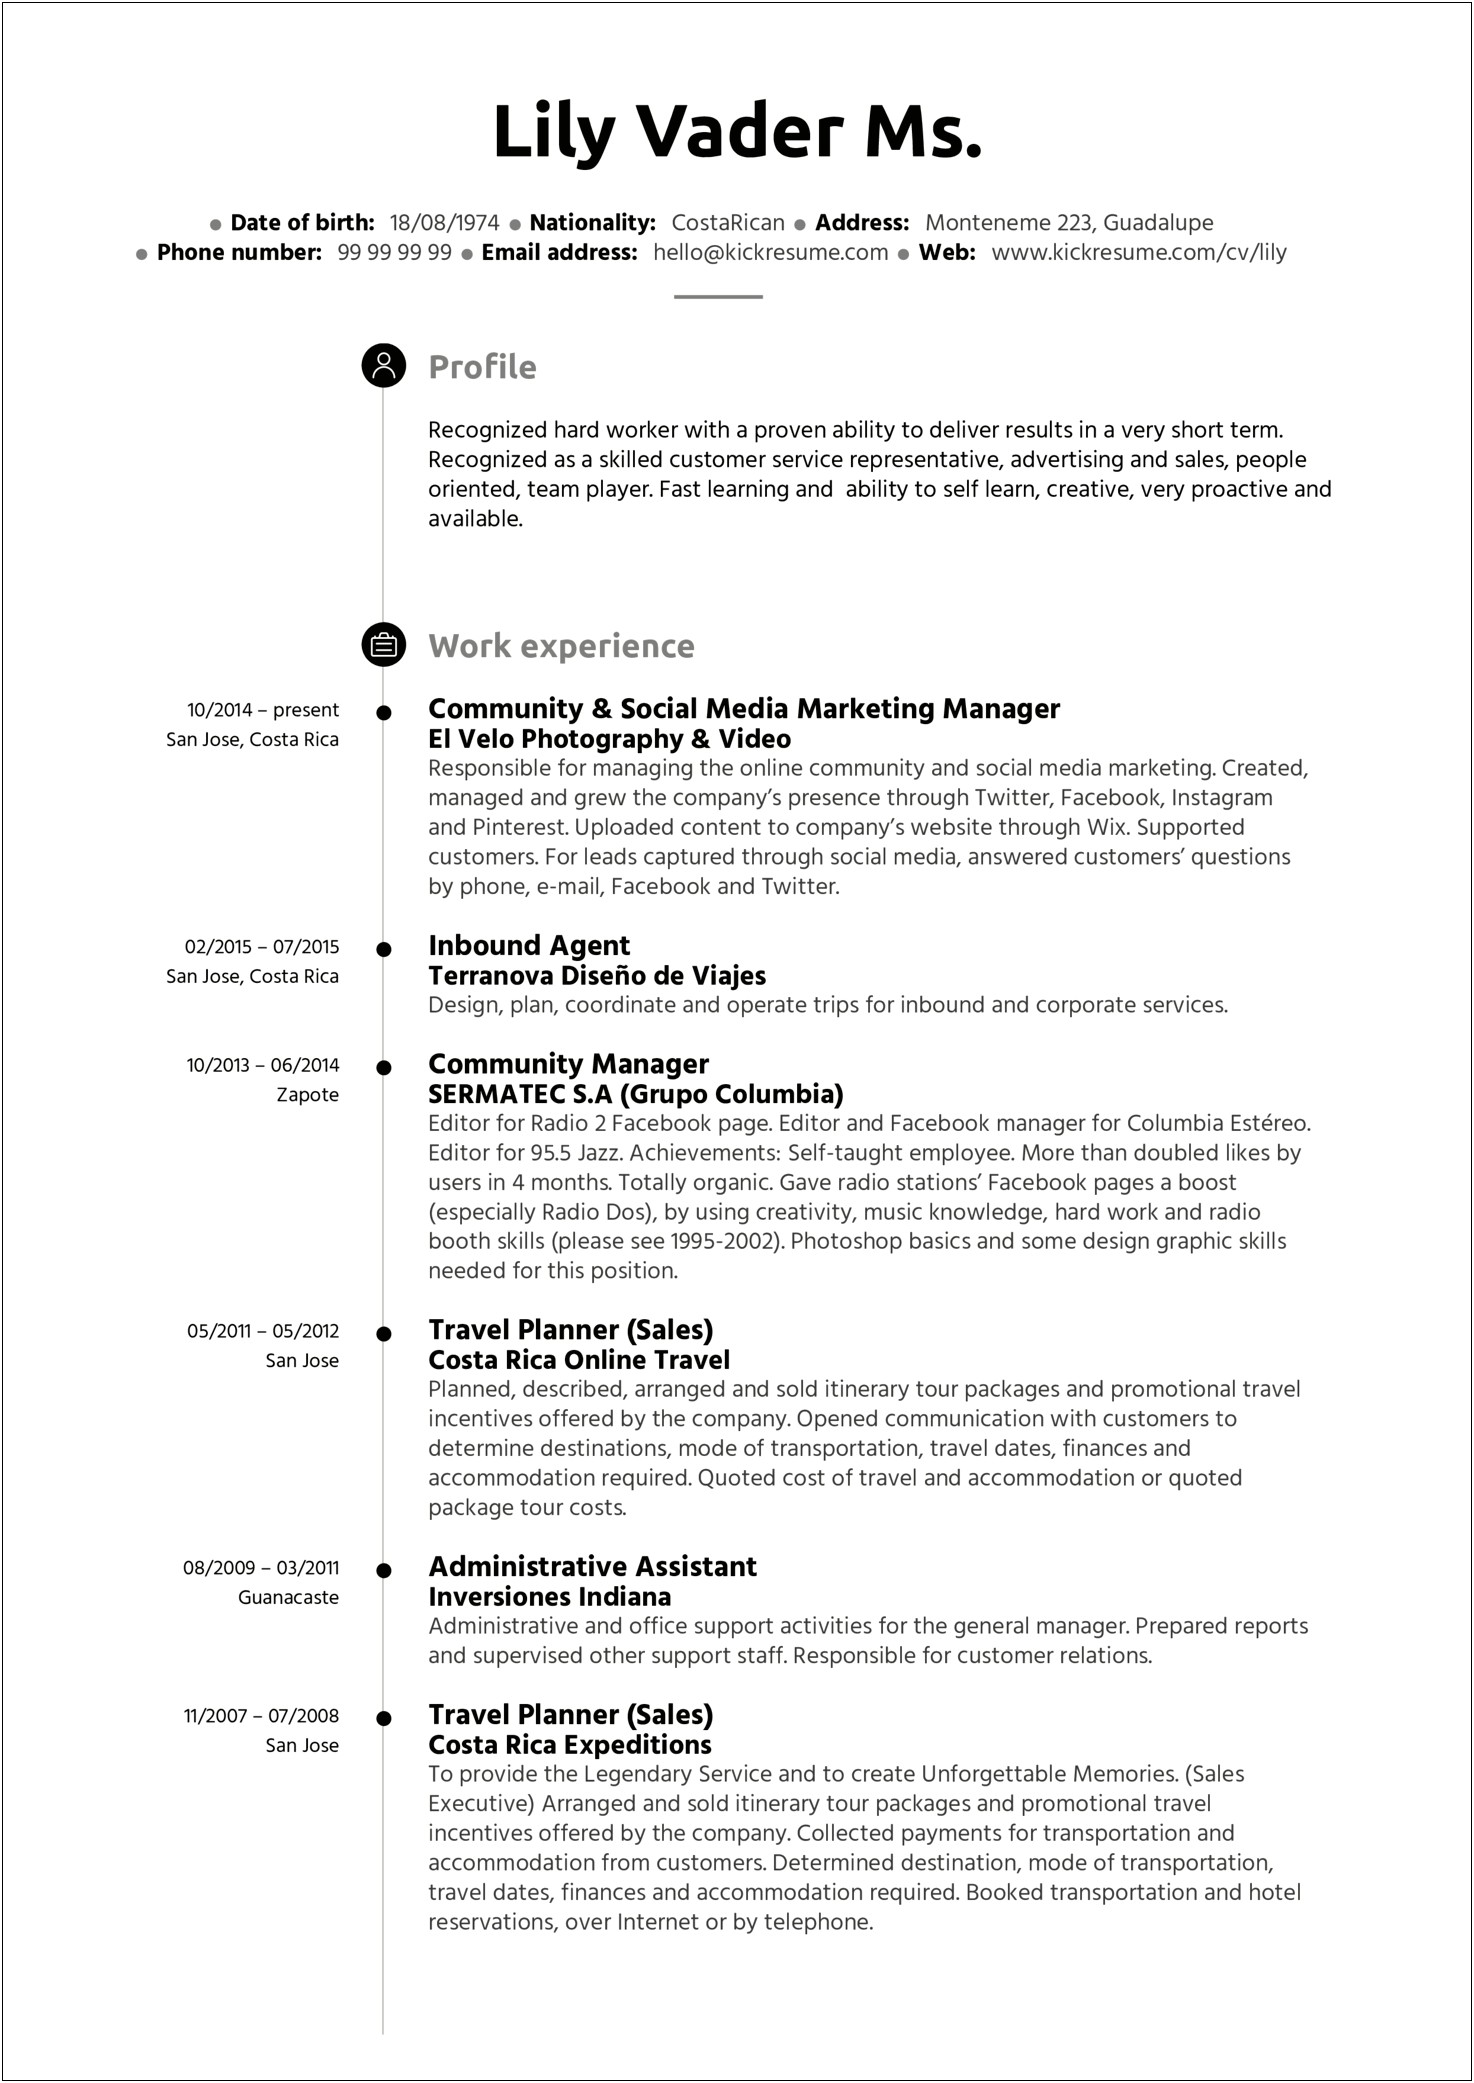 Resume For Office Assistant Objective